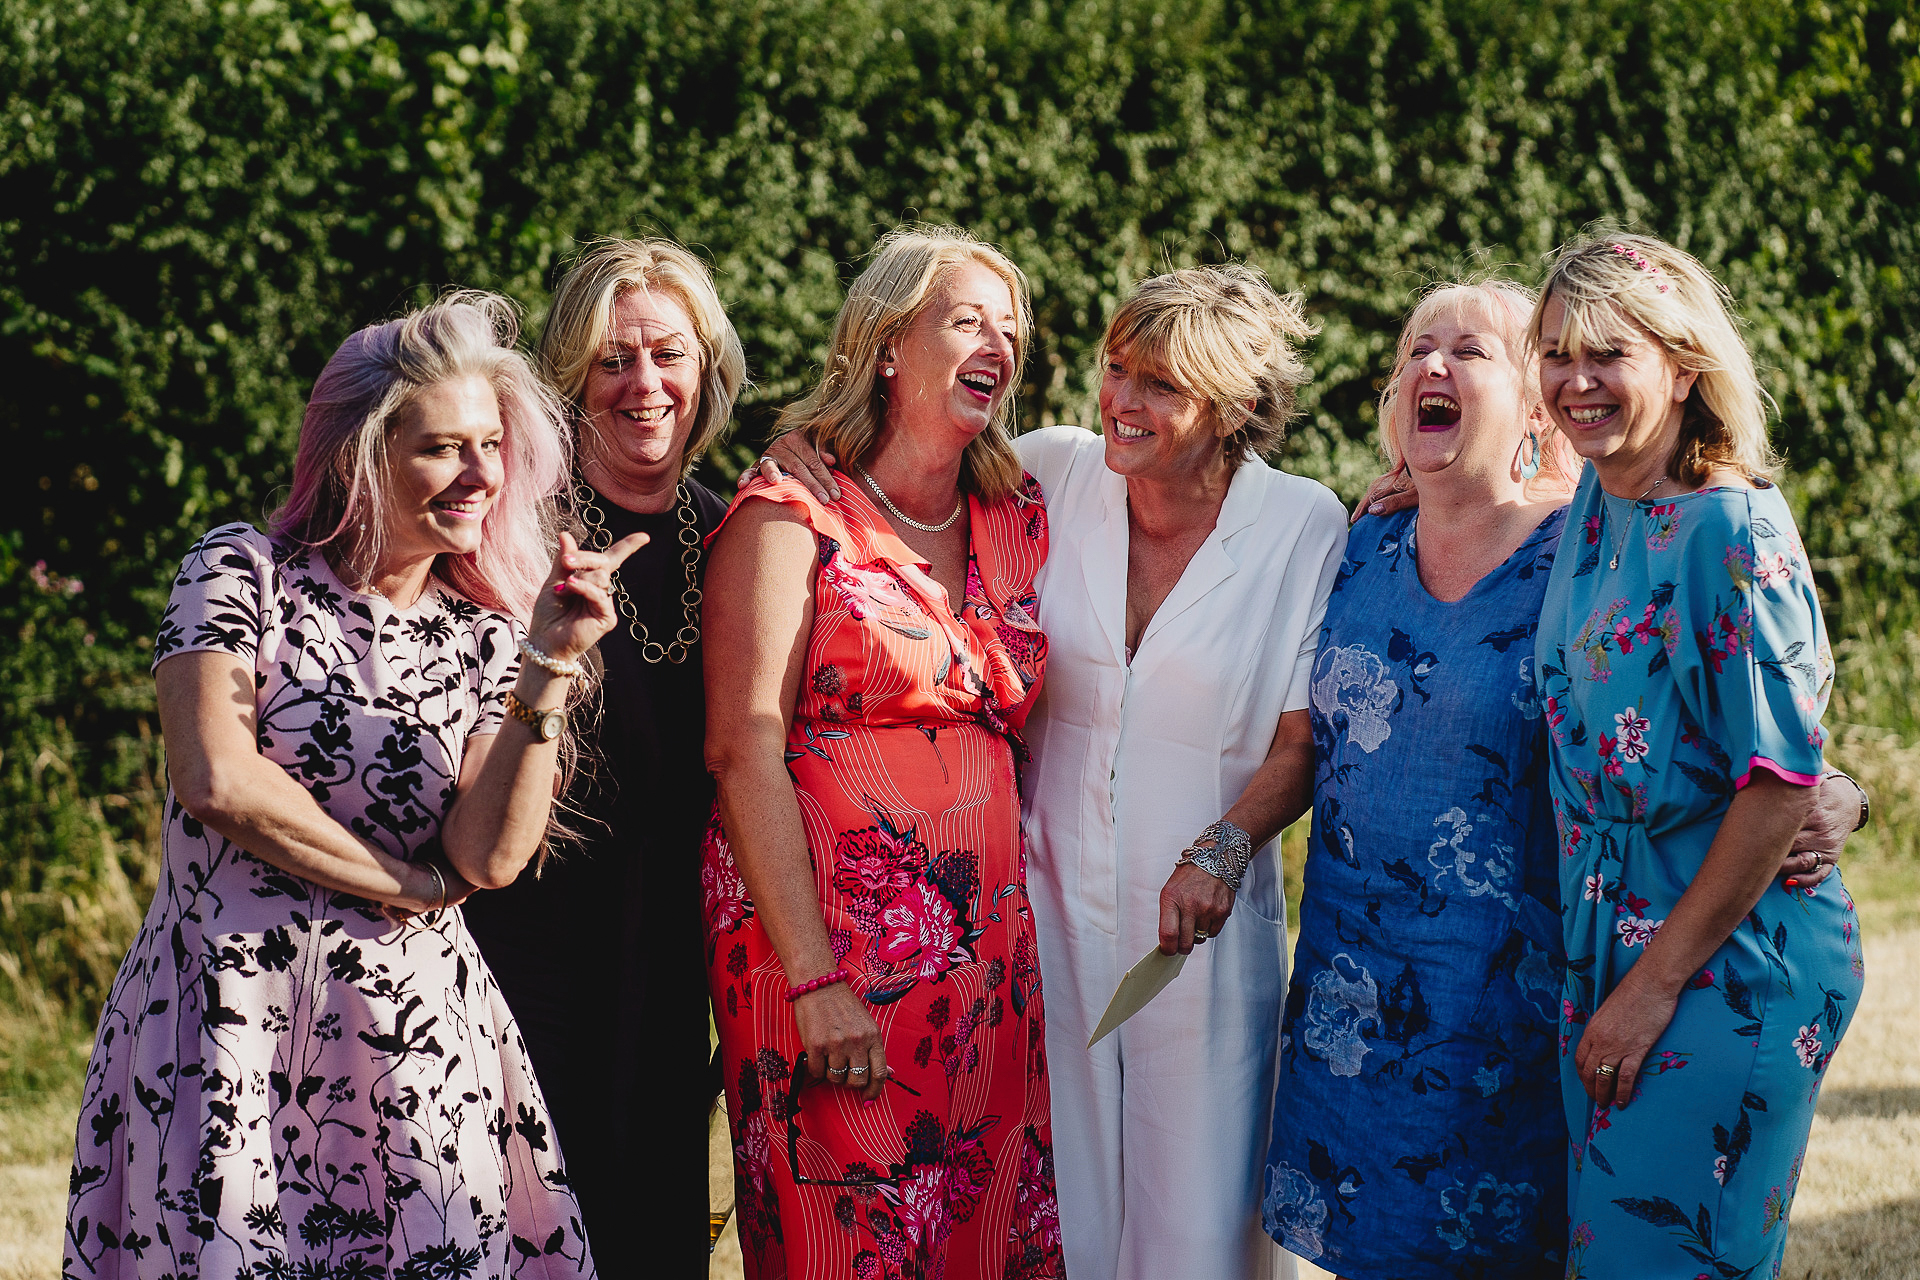 Group of women laughing together in a field